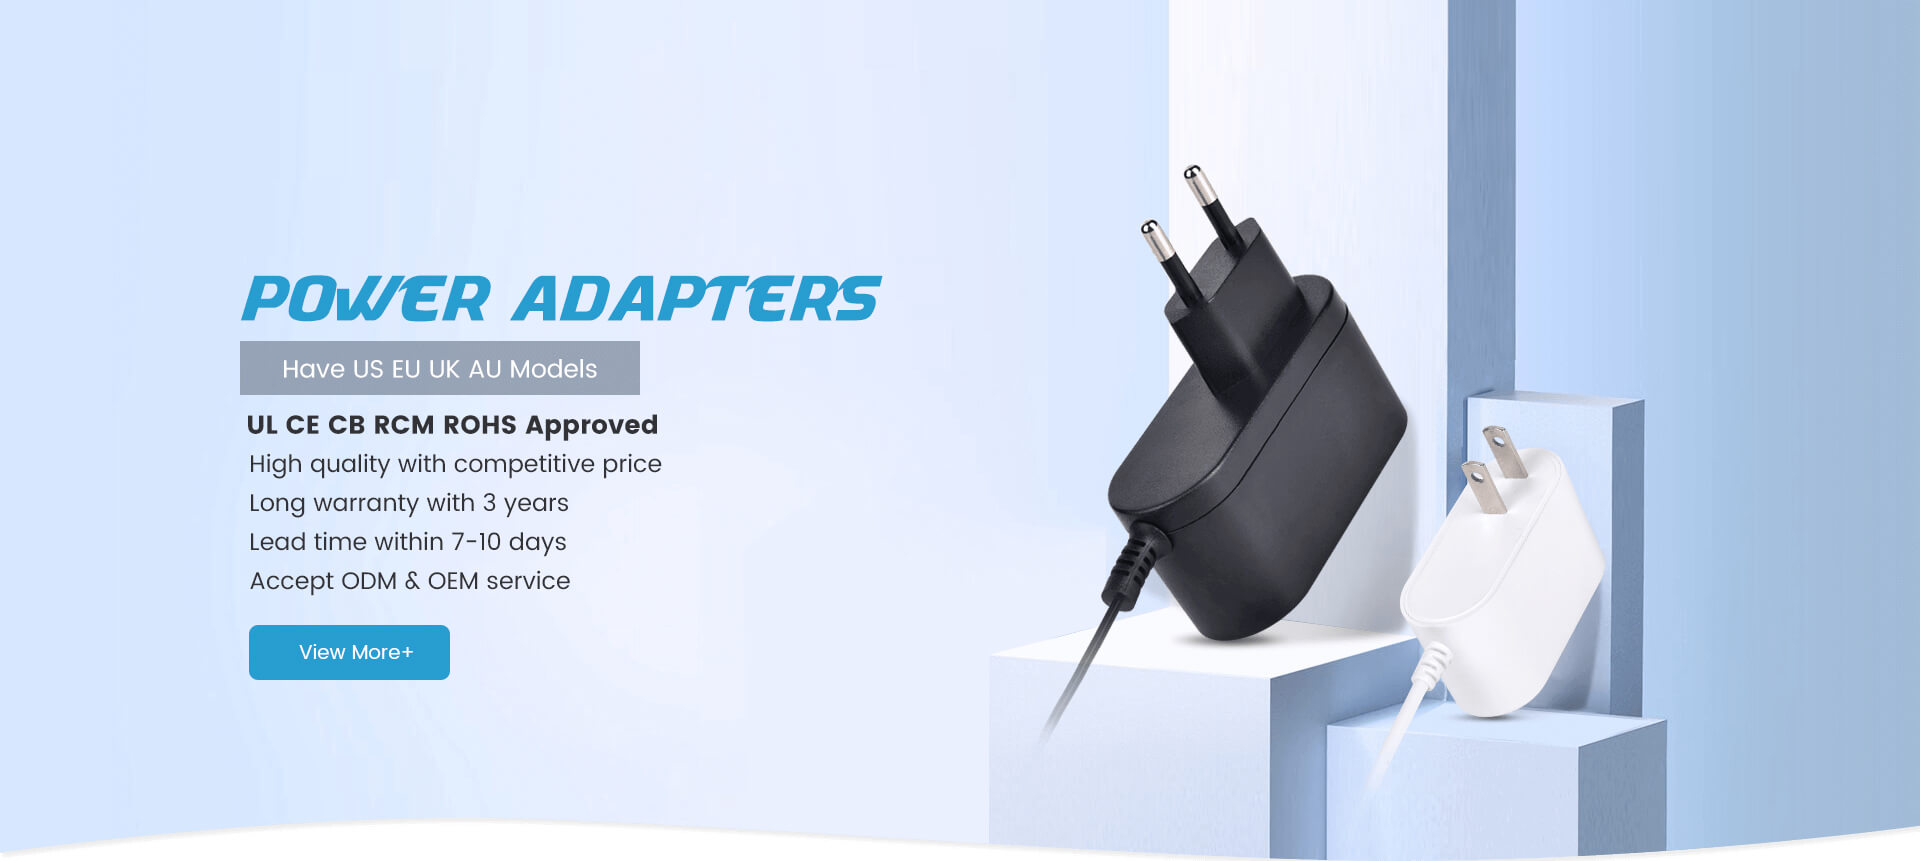 Wall Power Adapters